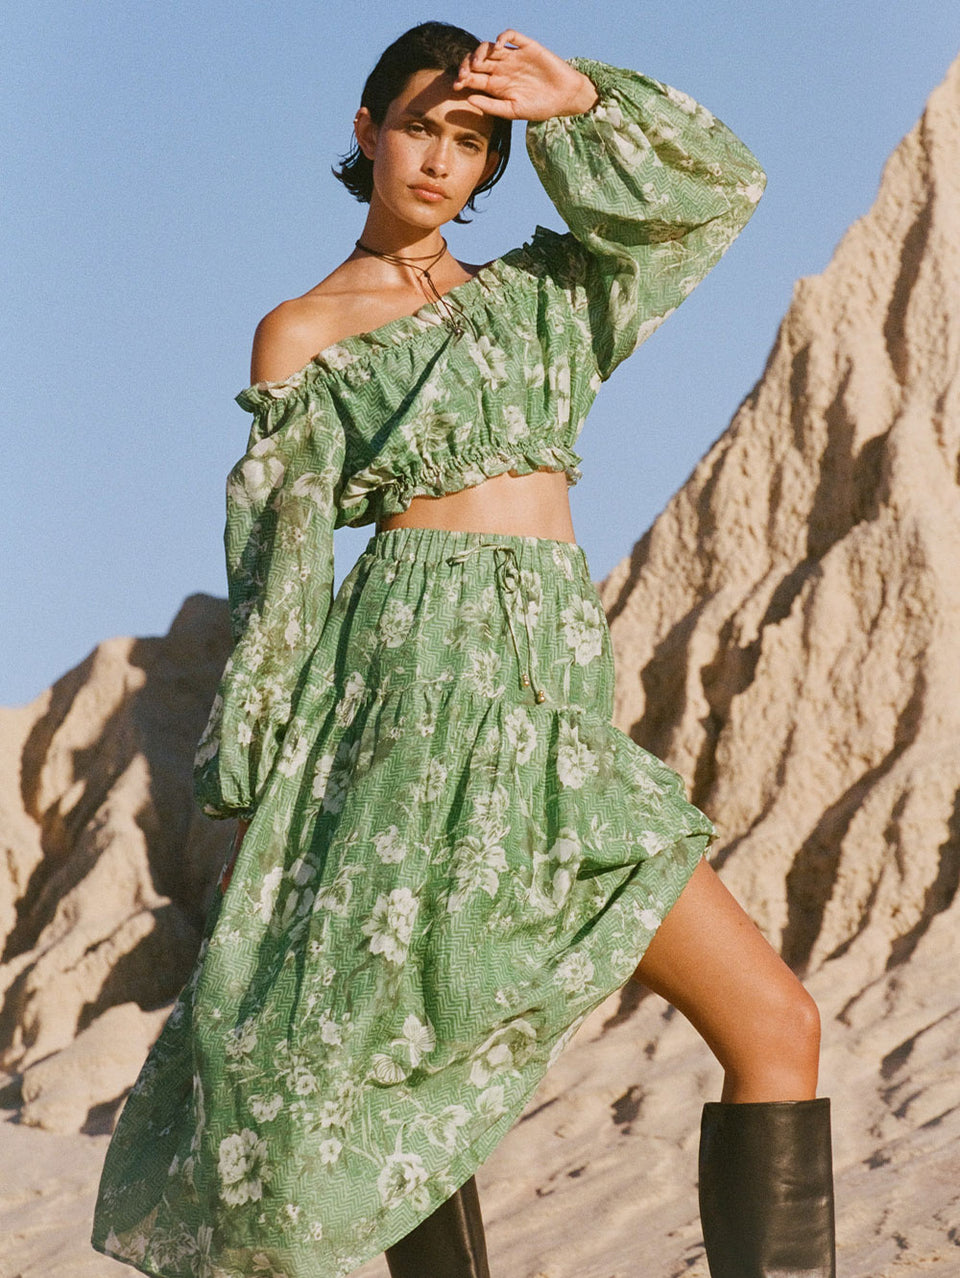 Campaign model wears KIVARI Khalo Midi Skirt: A green floral midi skirt featuring an elasticated drawstring waist with gold bead ends and a gathered tiered skirt.